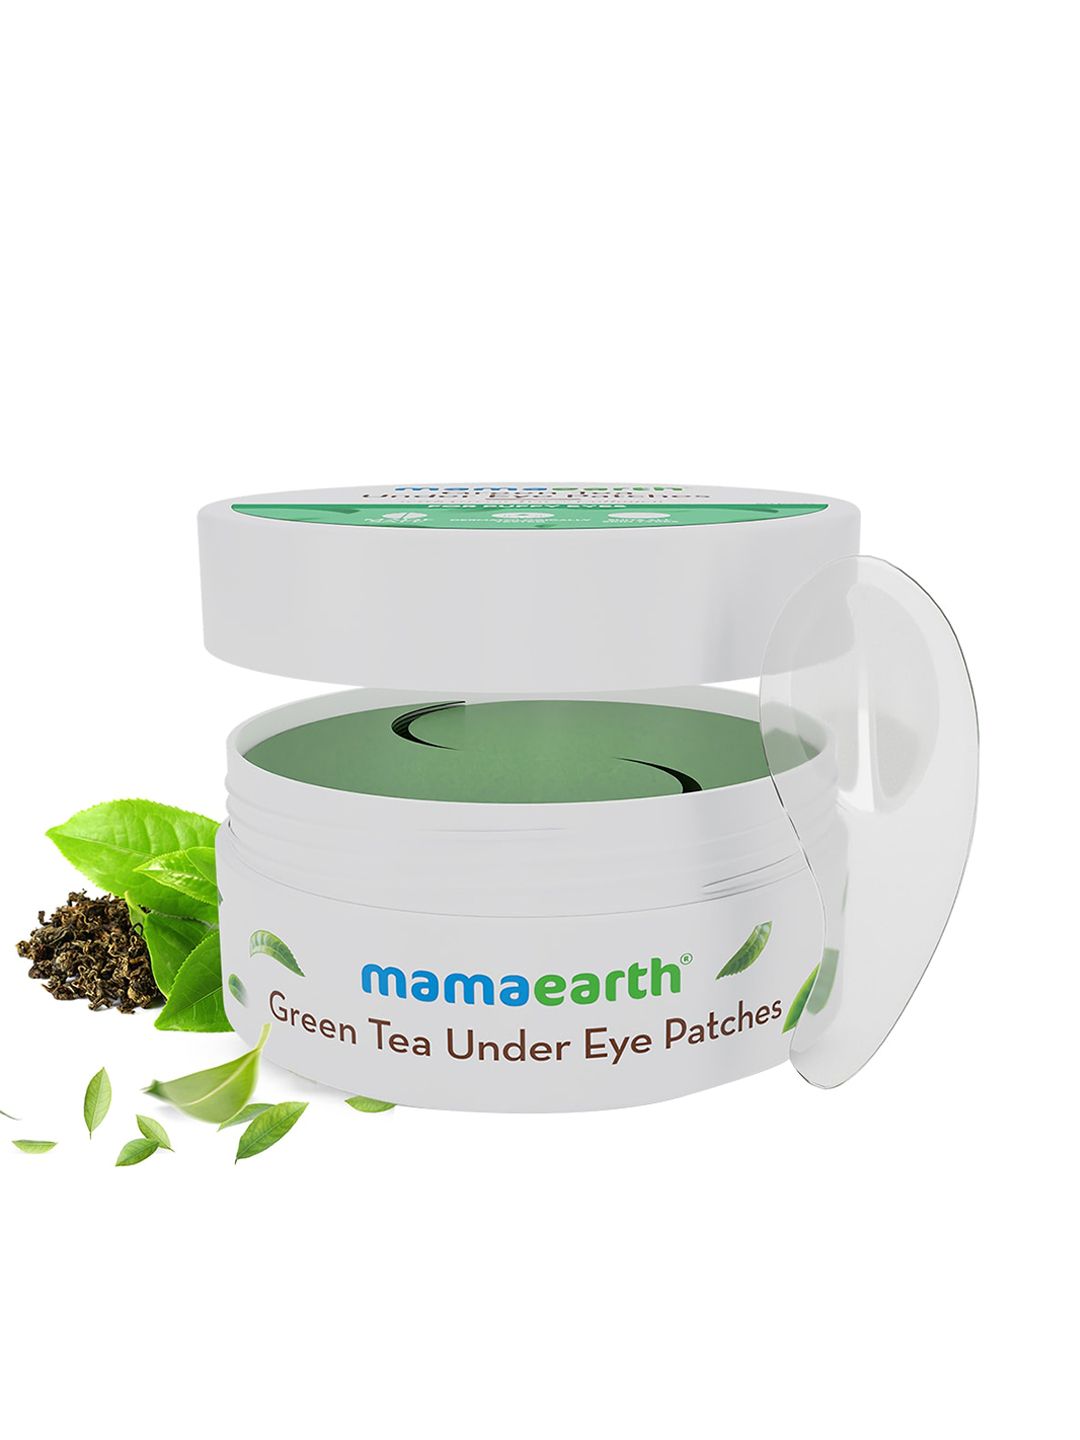 Mamaearth Green Tea & Collagen Under Eye Patches for Puffy Eyes-30 Pairs